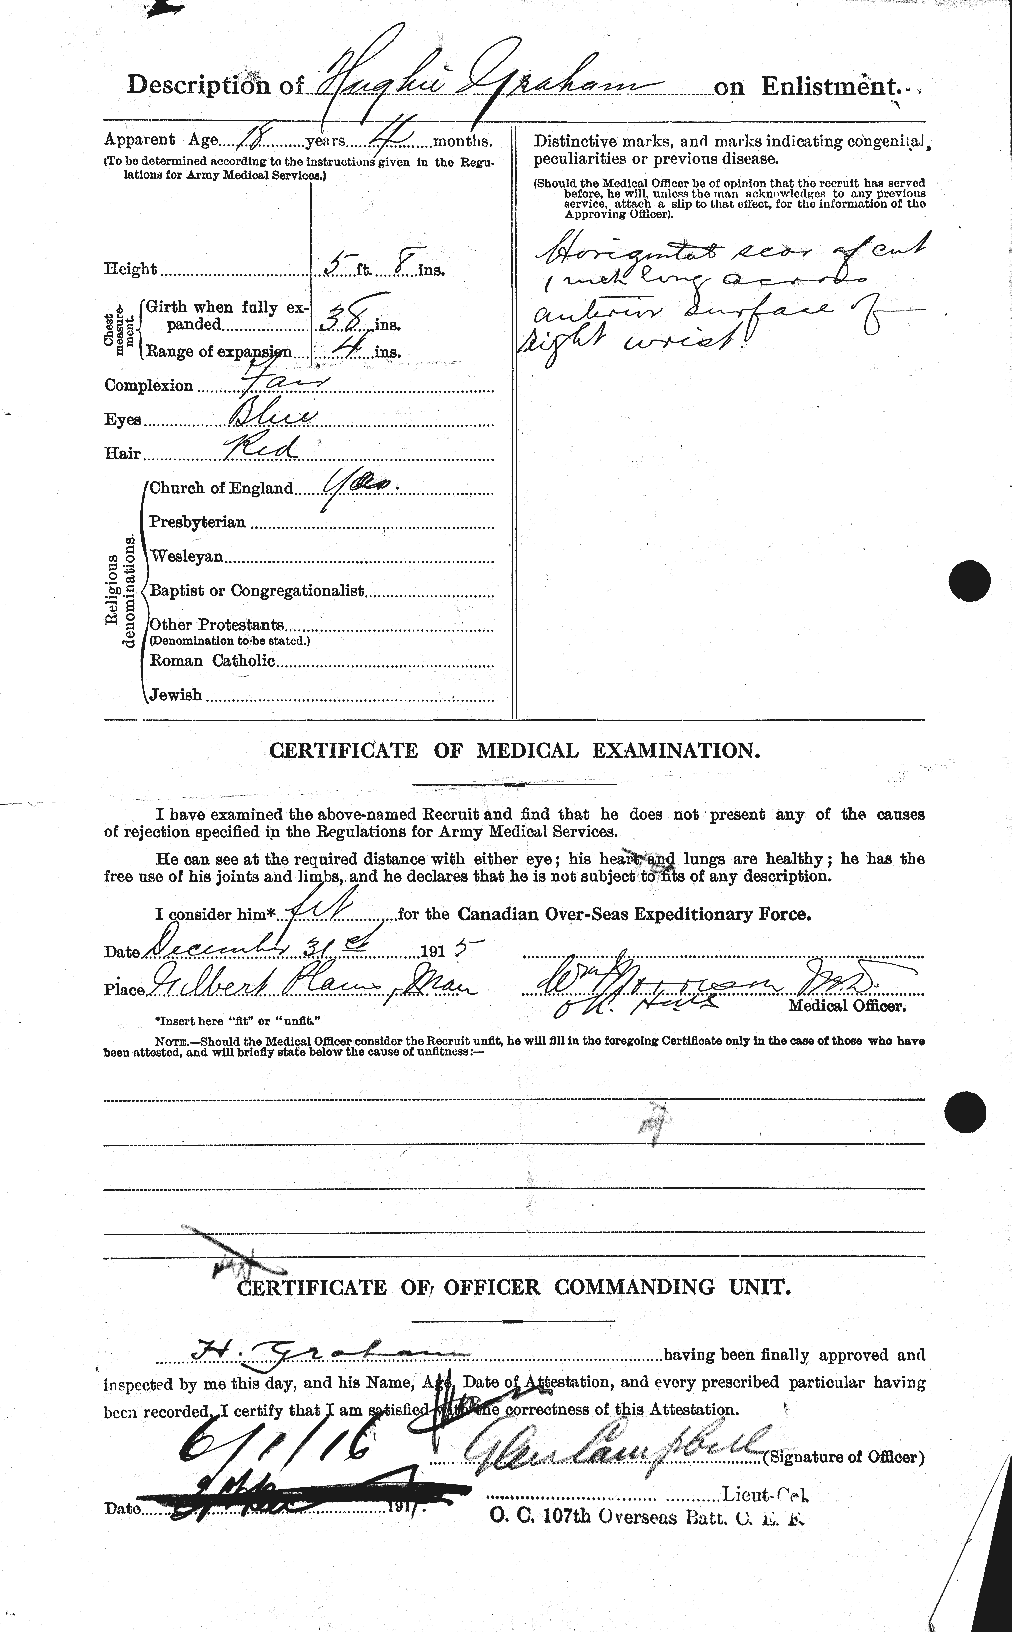 Personnel Records of the First World War - CEF 357766b